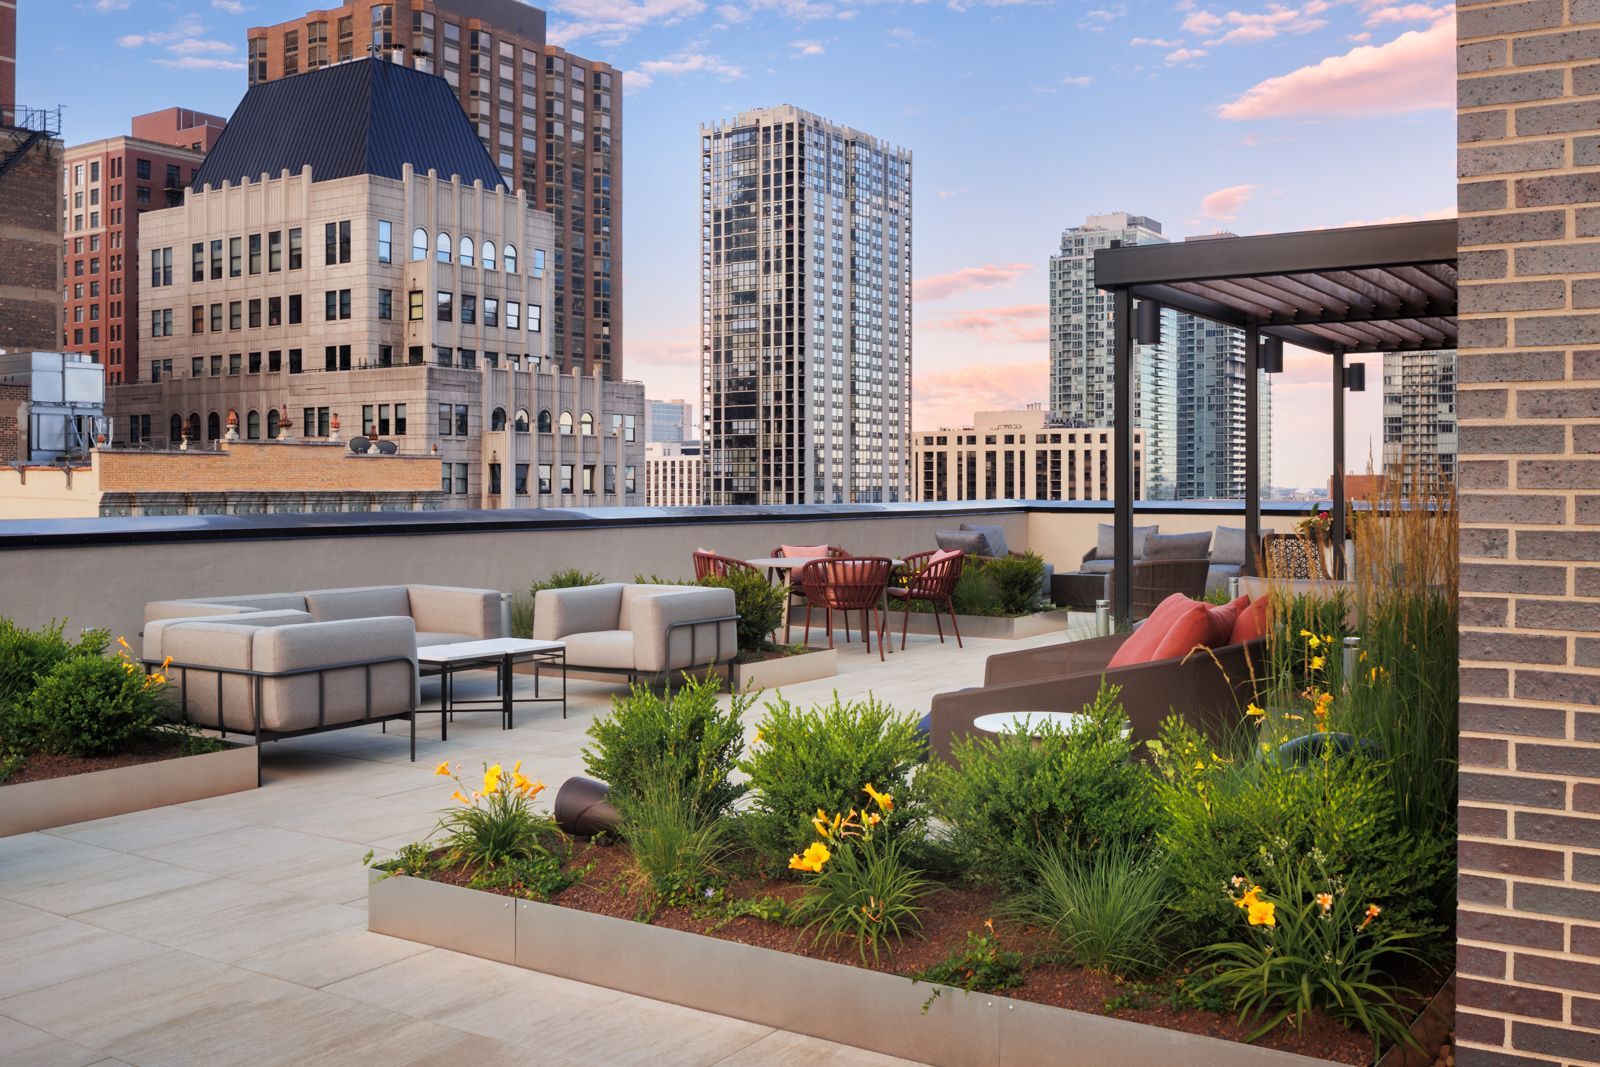 Gild apartment community rooftop deck with outdoor furniture.